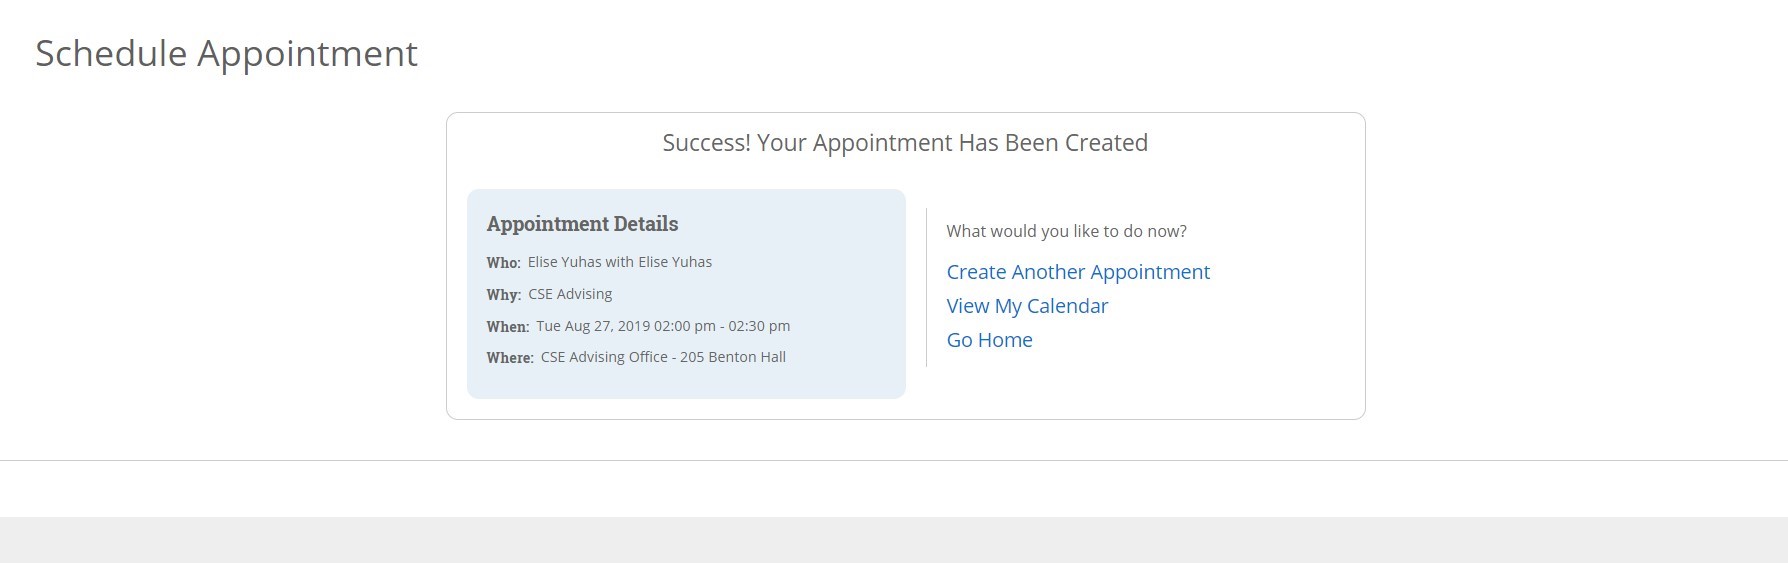 You will be redirected to a confirmation page that says “Success!  Your Appointment Has Been Created" and contains the who, why, when, and where details of your appointment.  A confirmation email will also be sent to your Miami email address.